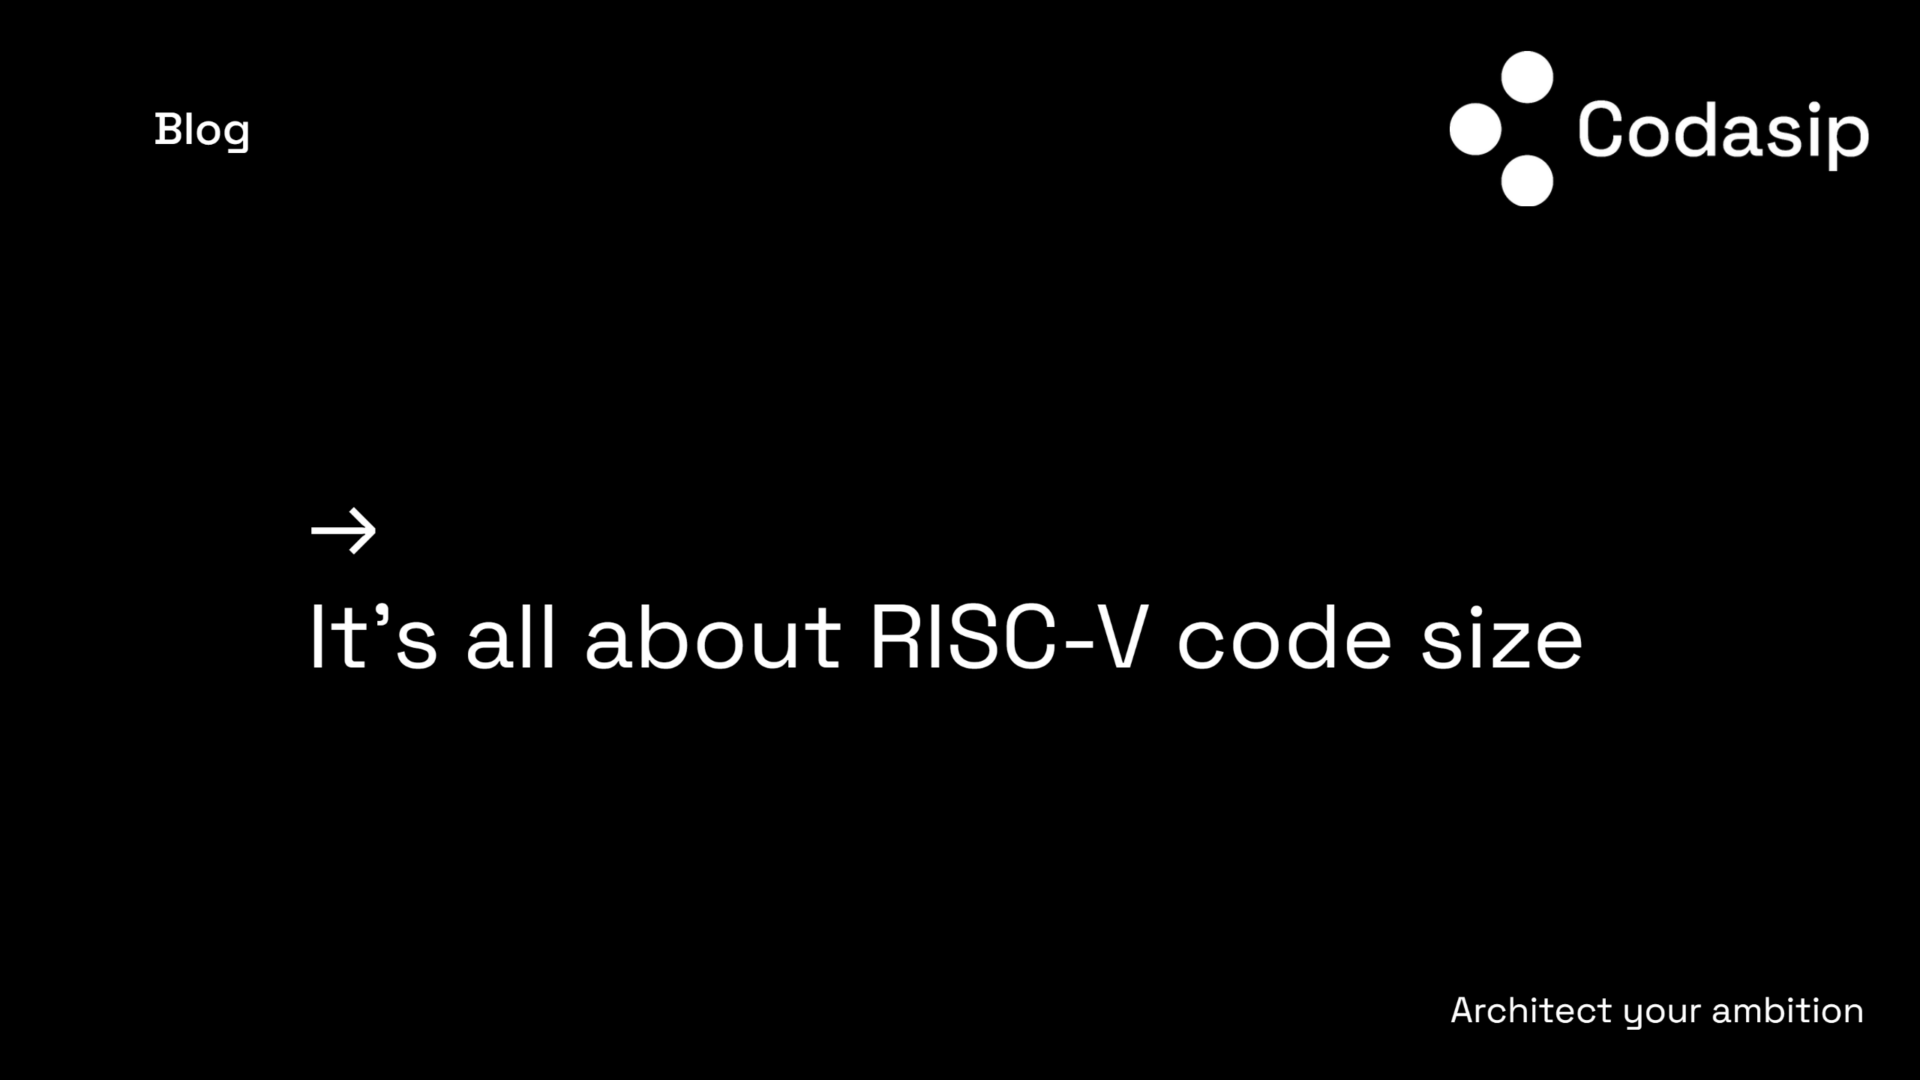 Featured image for blog on RISC-V code size